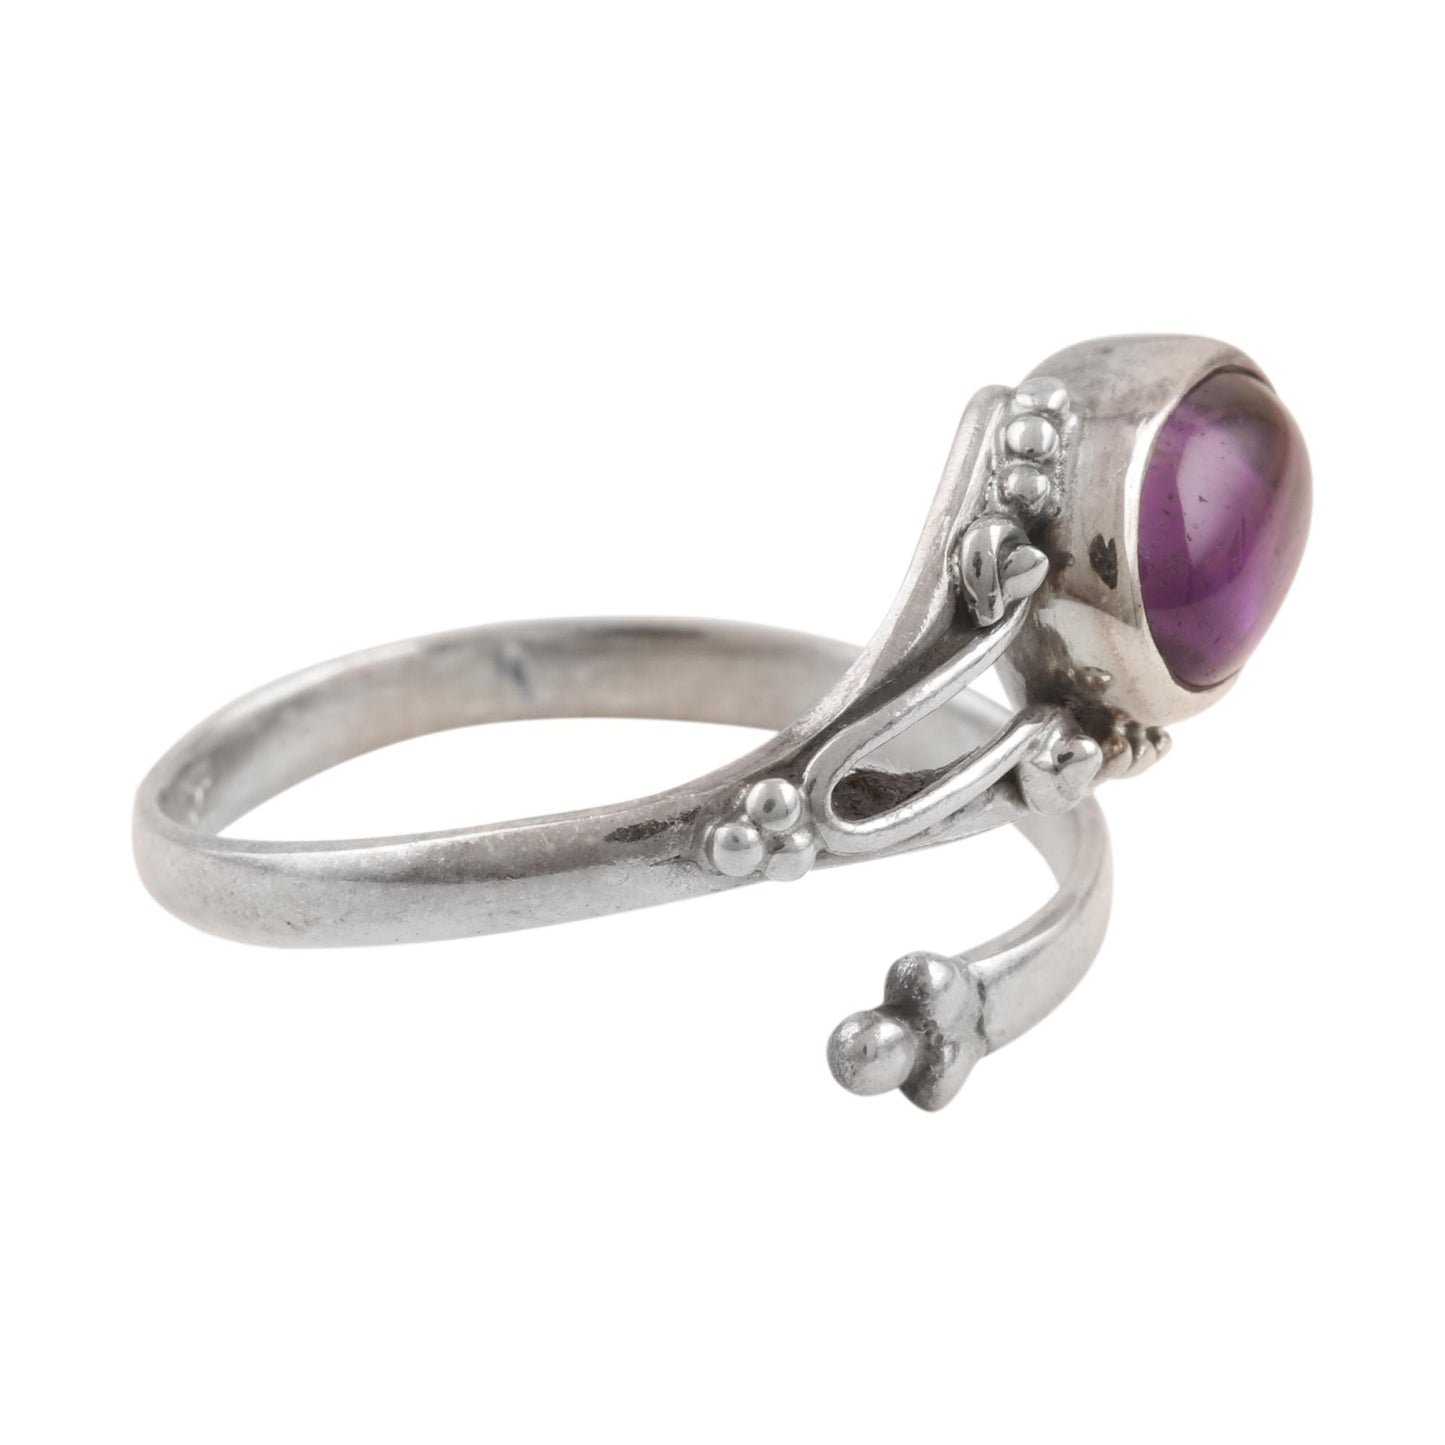 Summer Berries Hand Made Amethyst and Sterling Silver Wrap Ring